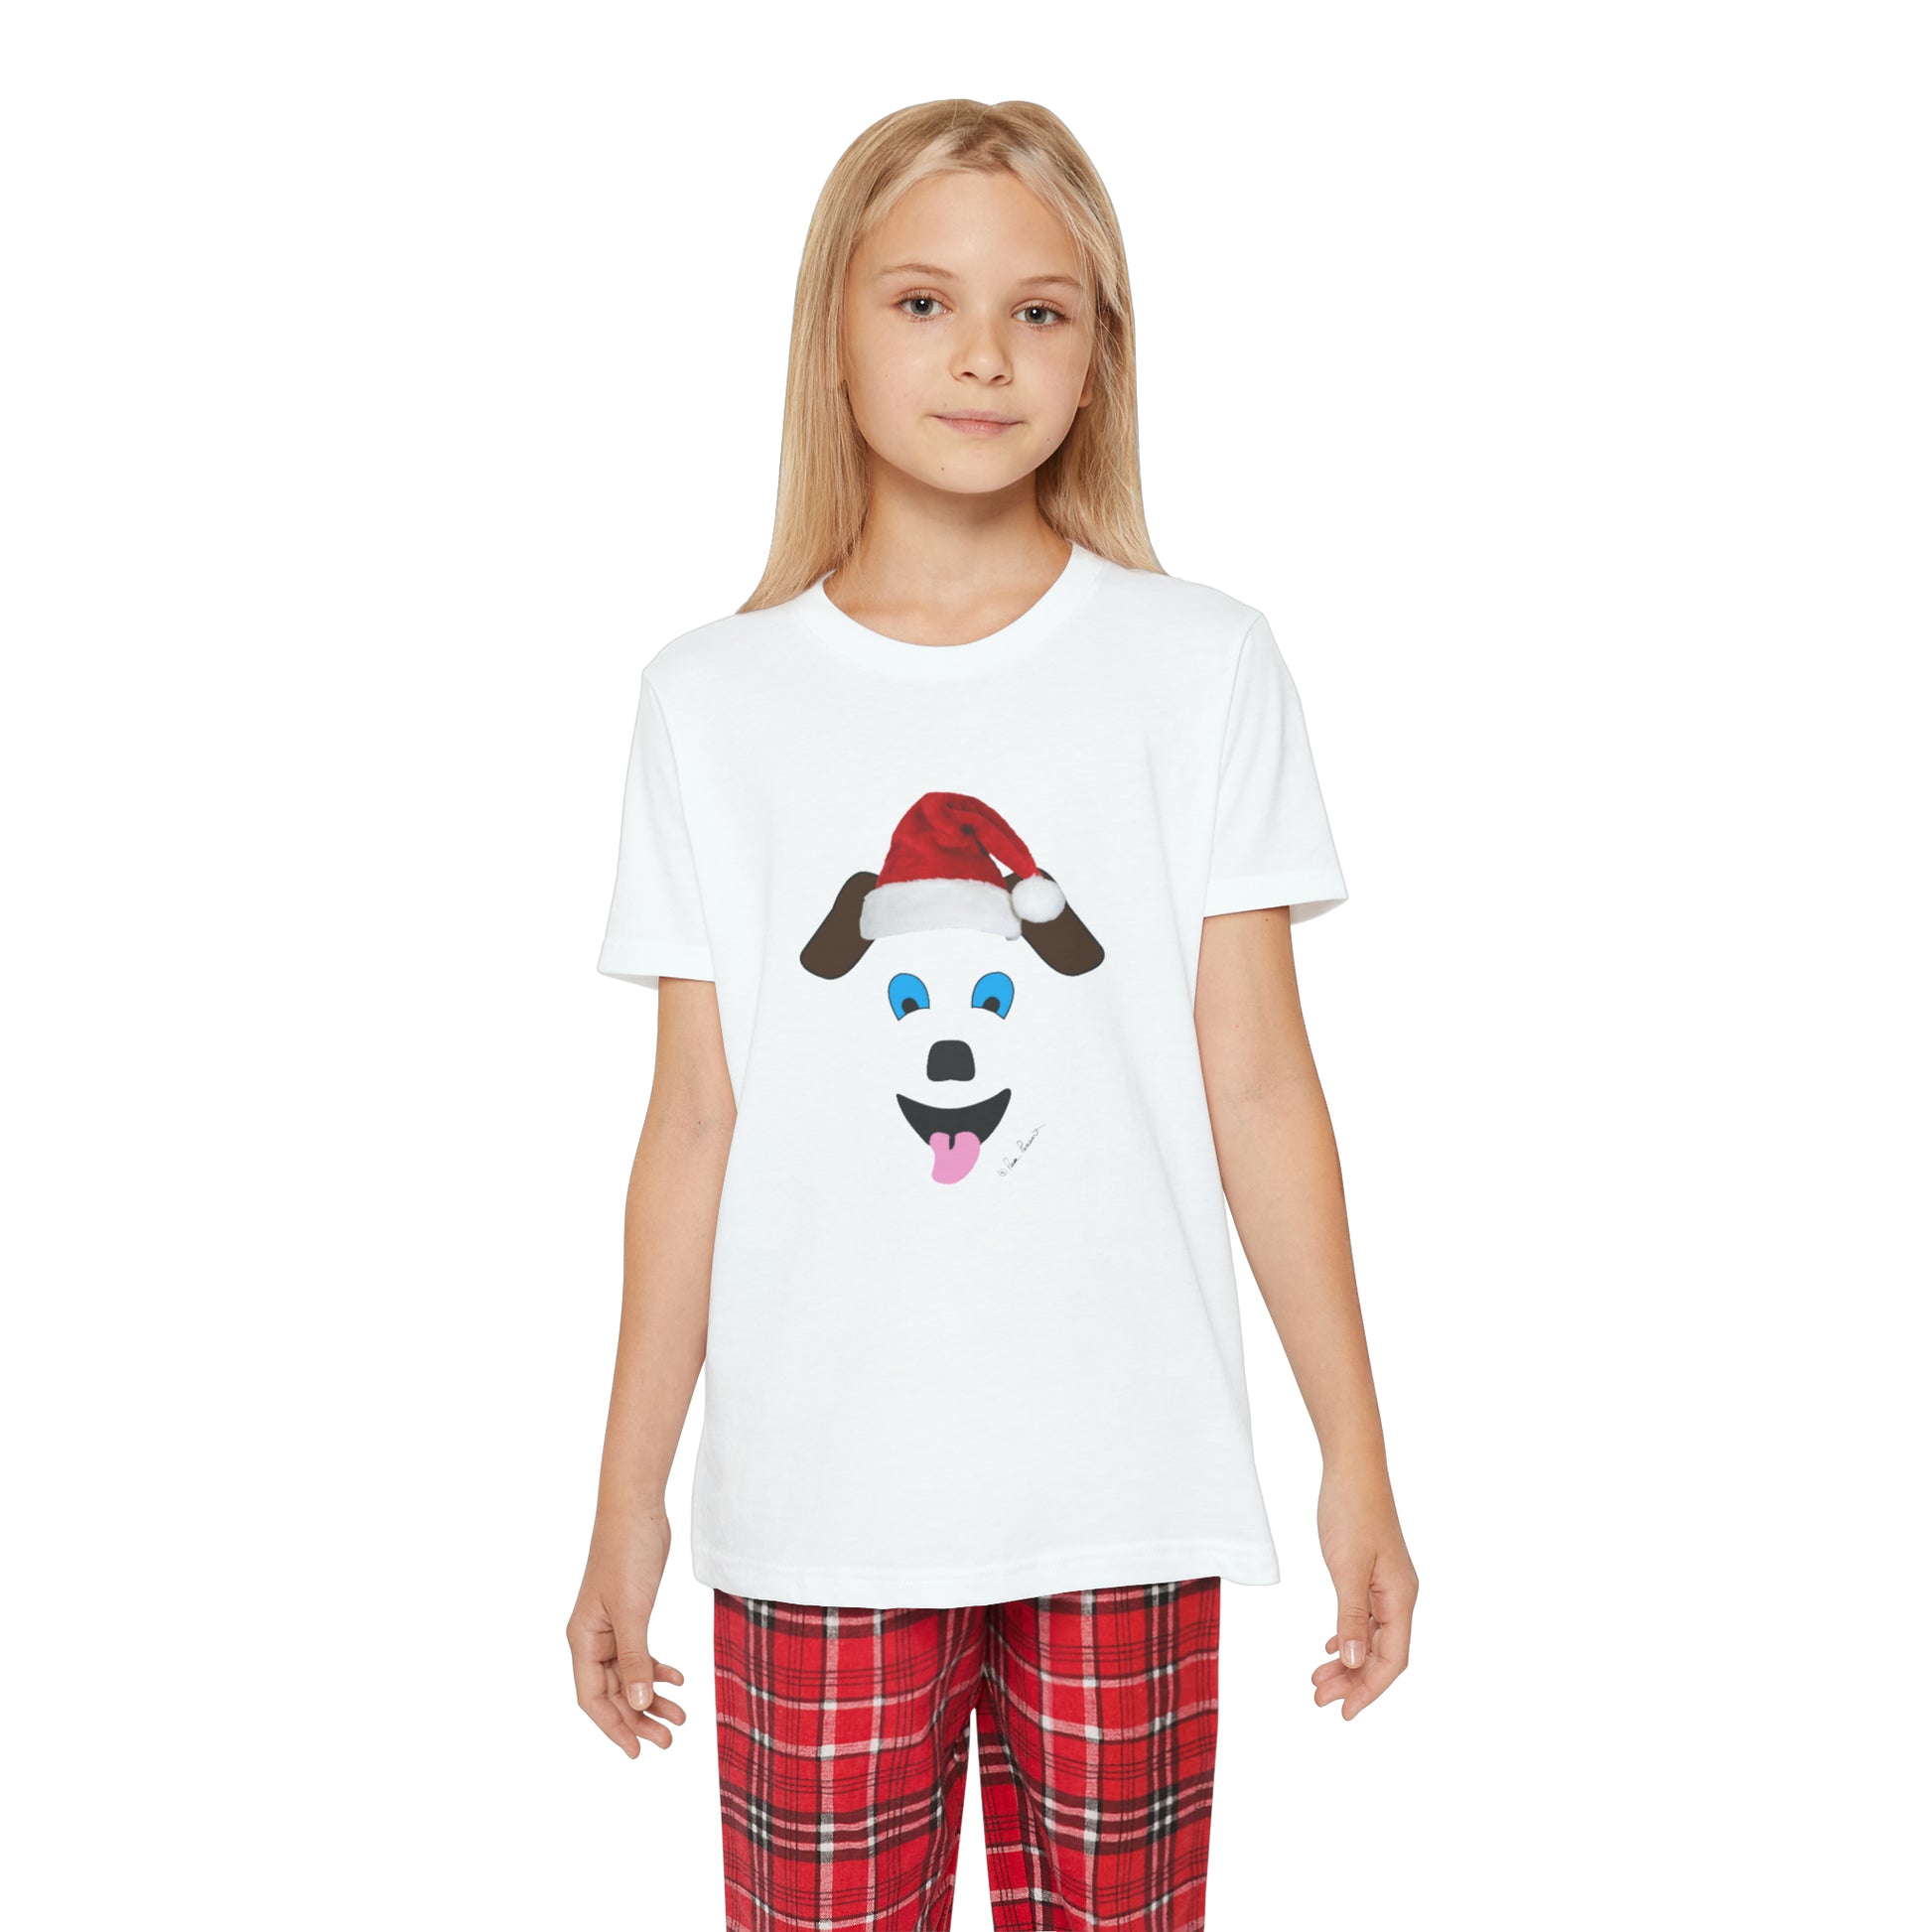 A girl wearing a white shirt with a dog on it made of 100% cotton Printify Unisex Youth Holiday Pajamas: 4 sizes; 2-pc. set; Cotton.